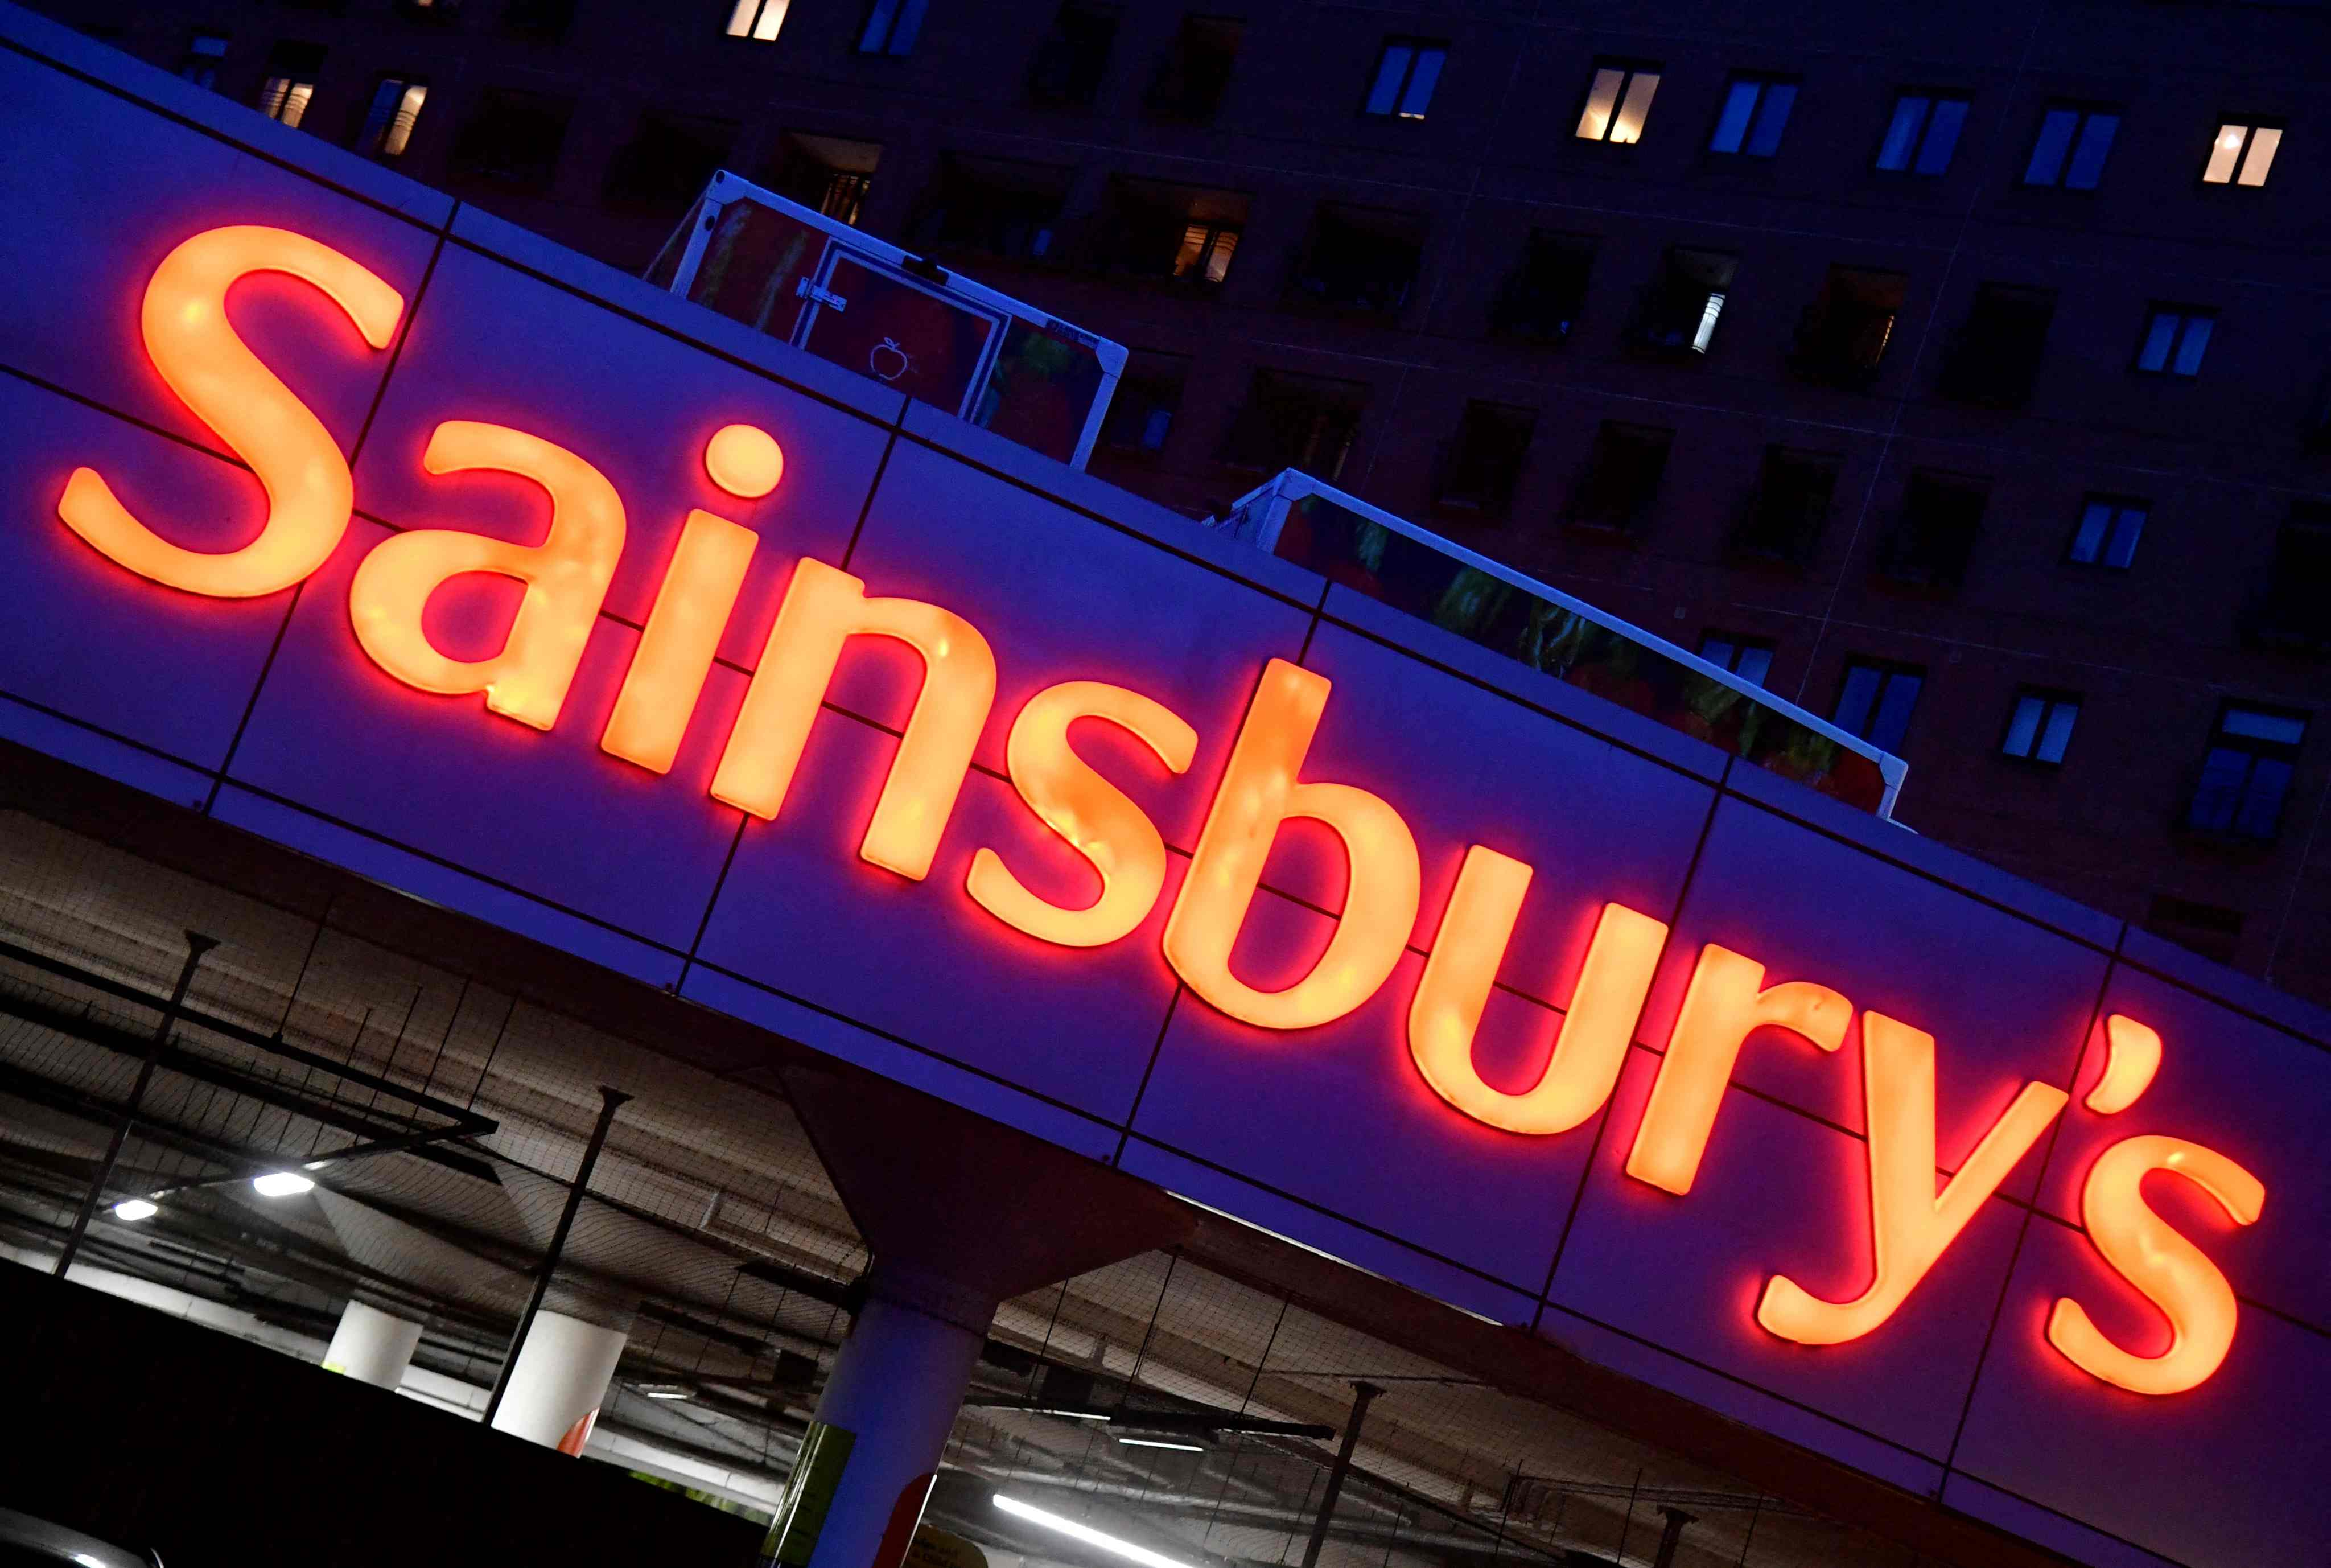 19 Facts About Sainsburys - Facts.net